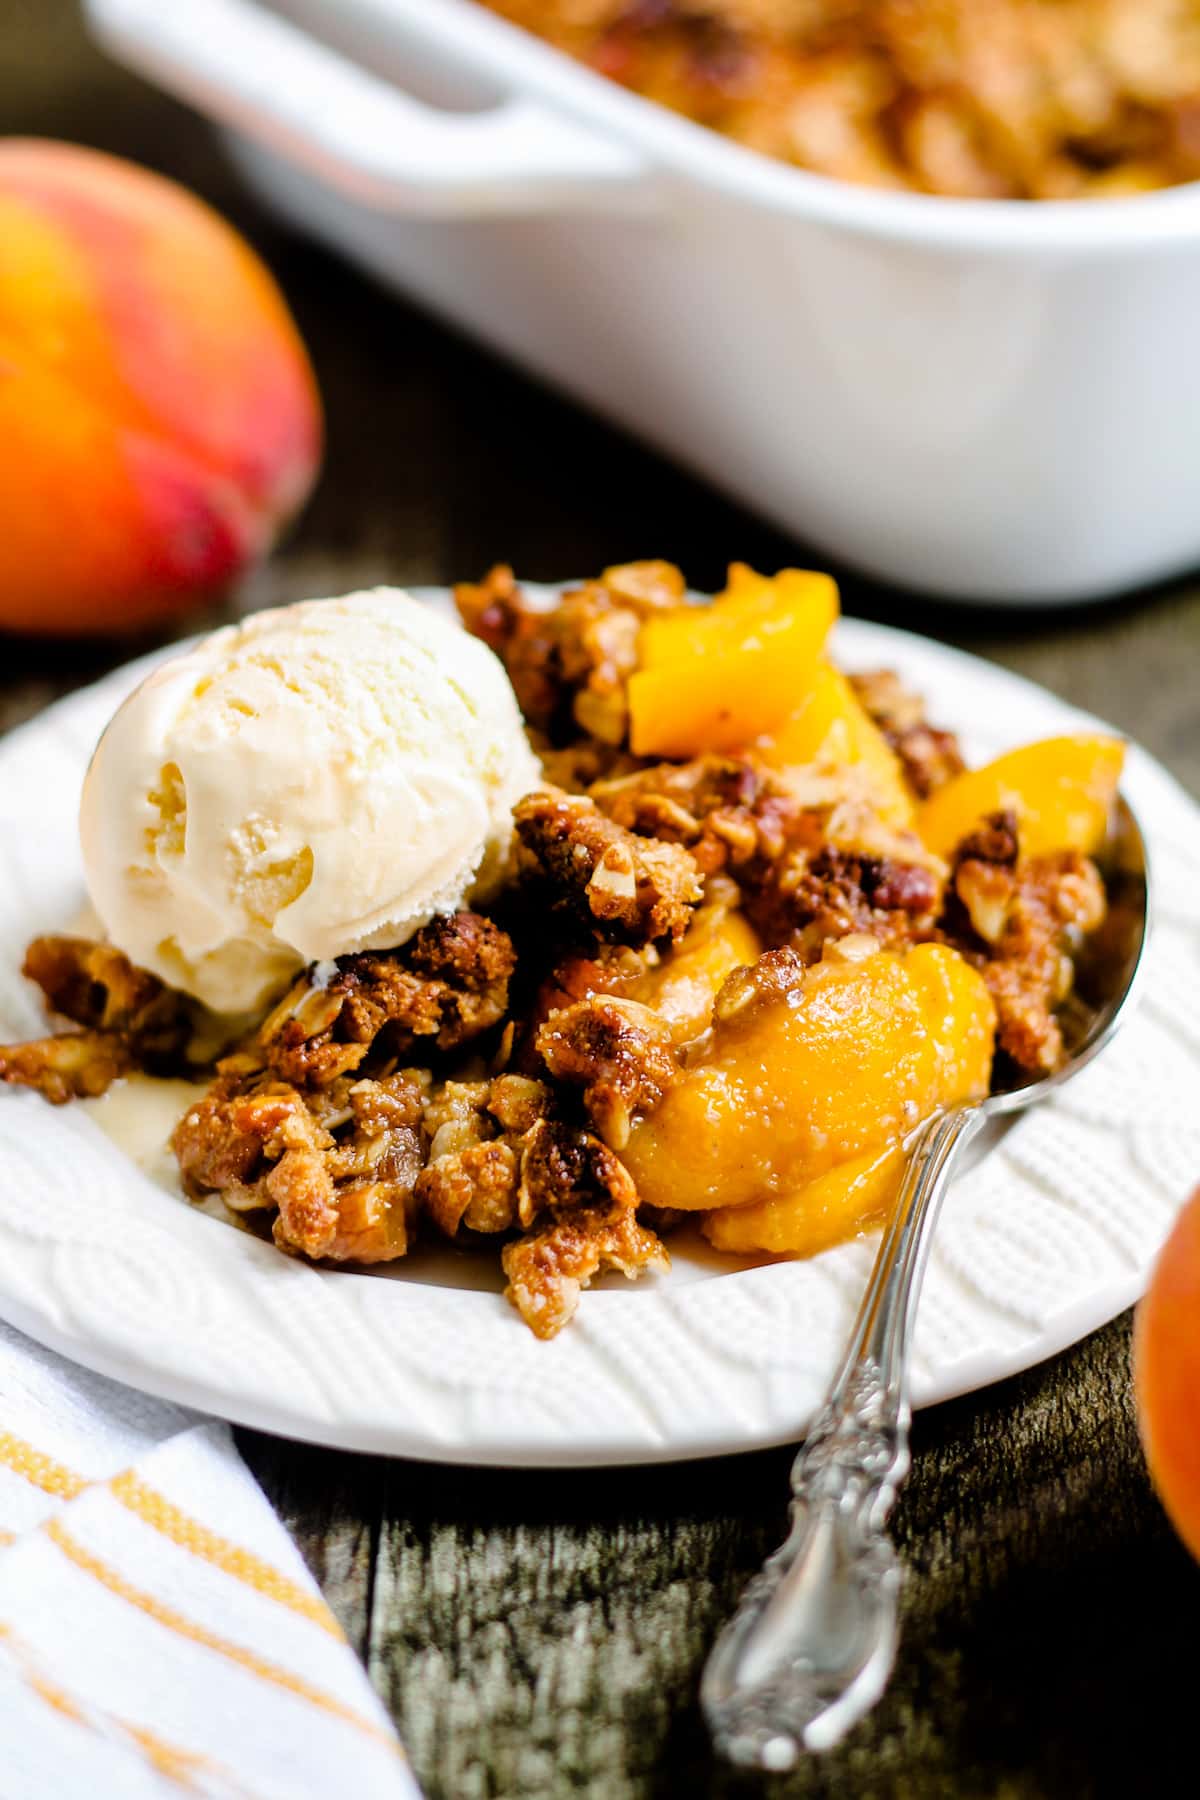 A plate of freshly baked peach crisp topped with ice cream.